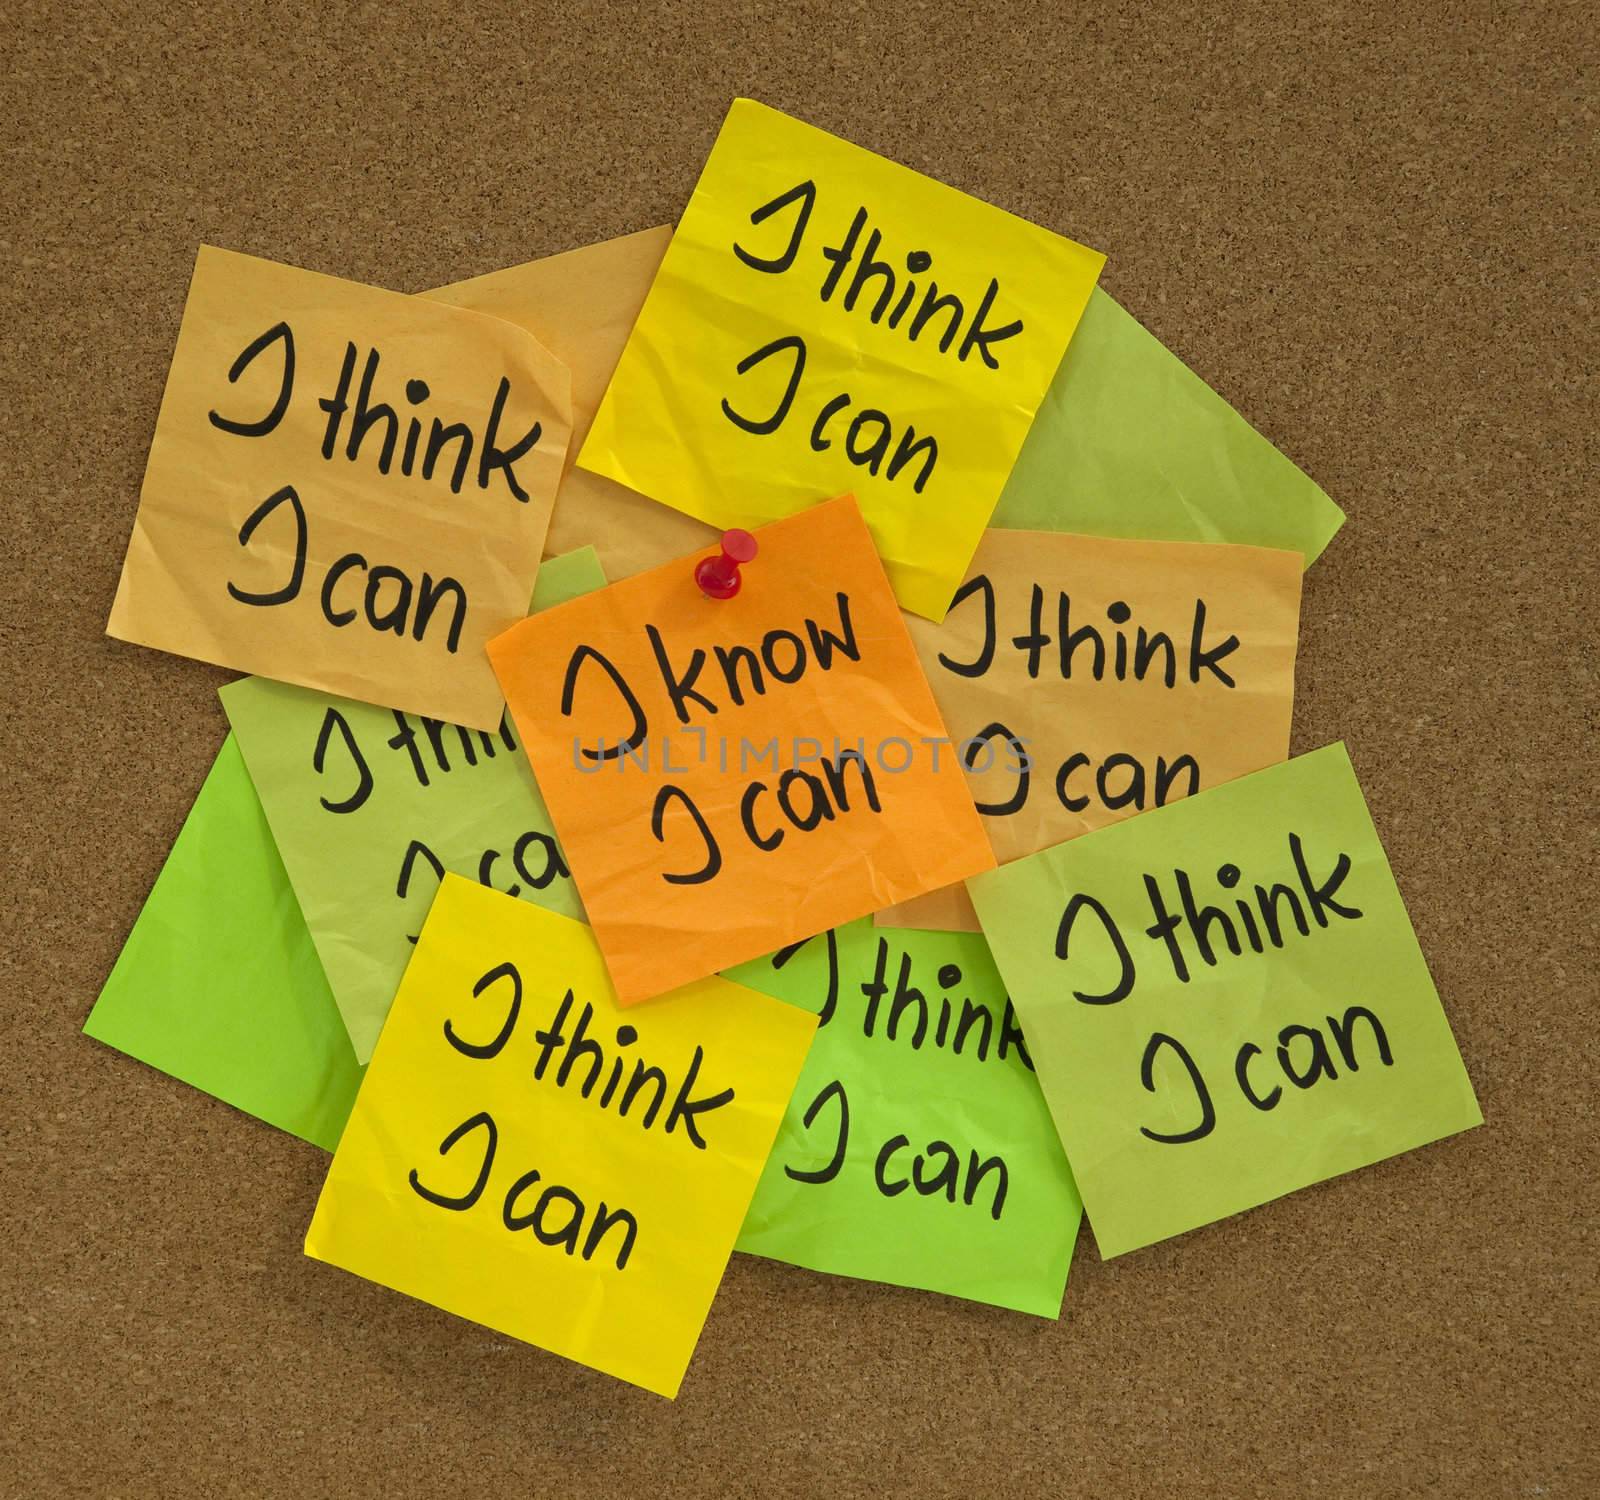 I know I can - self confidence and motivational concept, presented with a pile of sticky notes on cork bulletin board